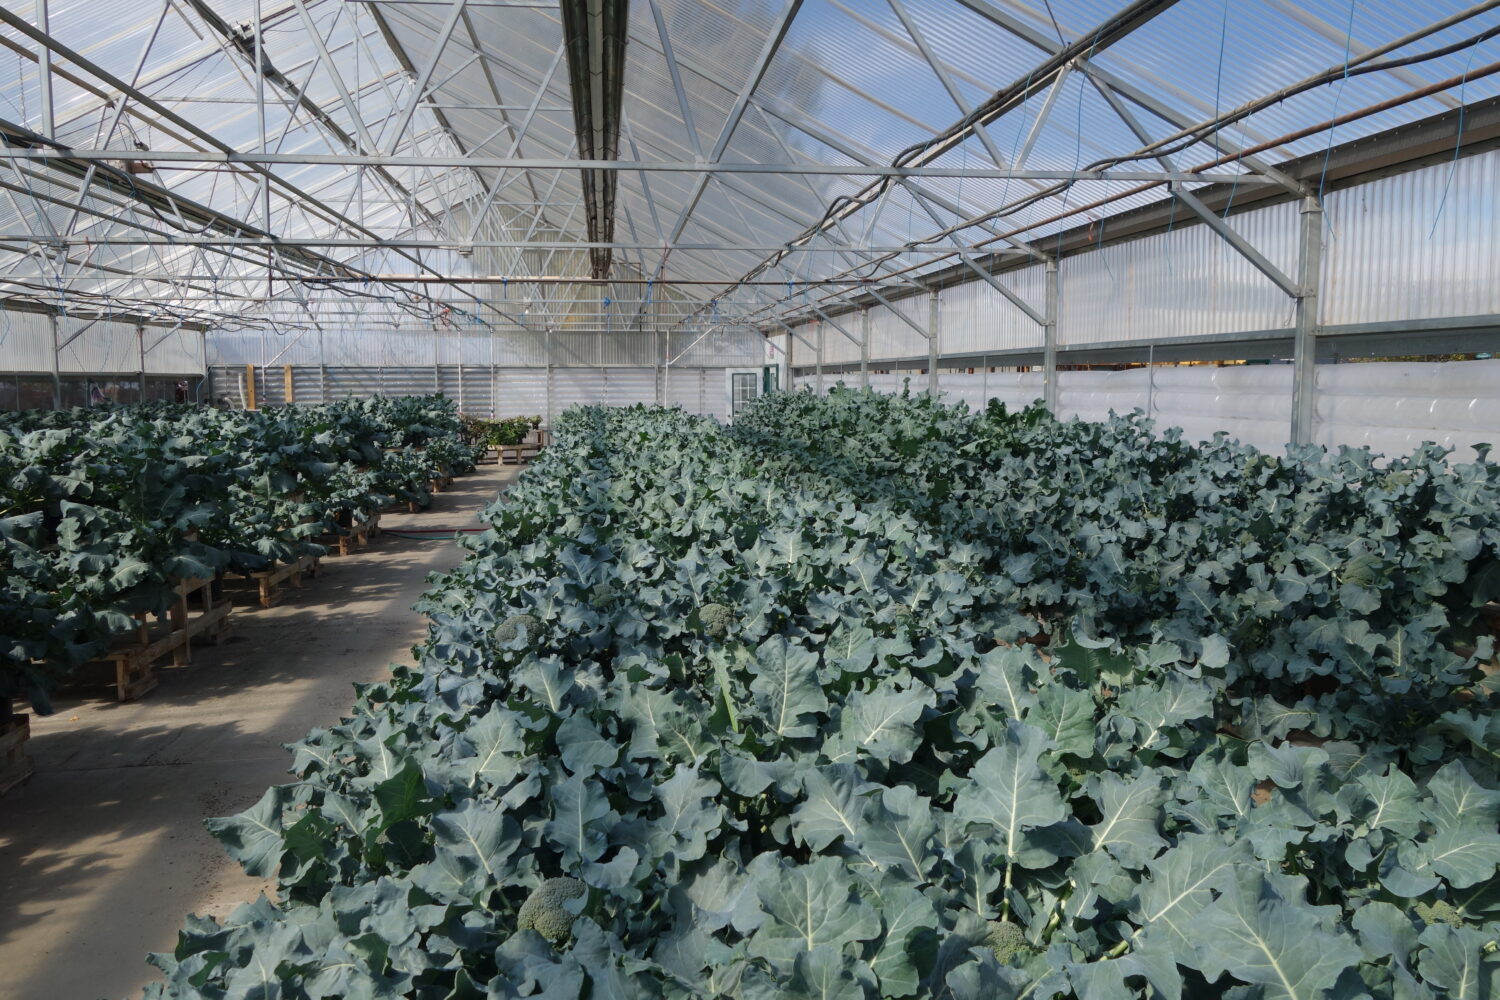 Vic began growing lettuce and tomatoes in the greenhouse to try to supplement their diet, but soon branched out to other crops like kale and broccoli.